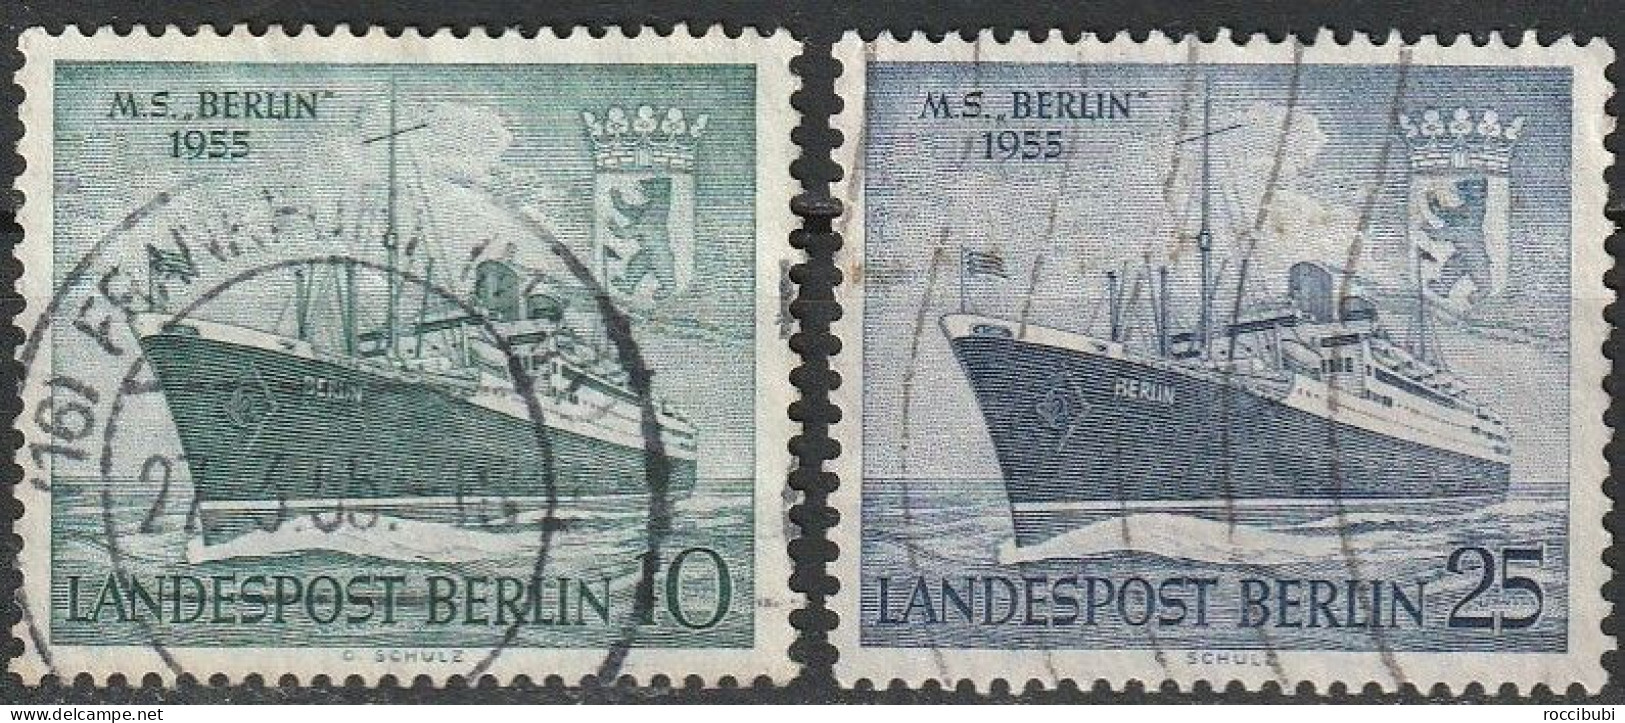 1955...126/127 O - Used Stamps